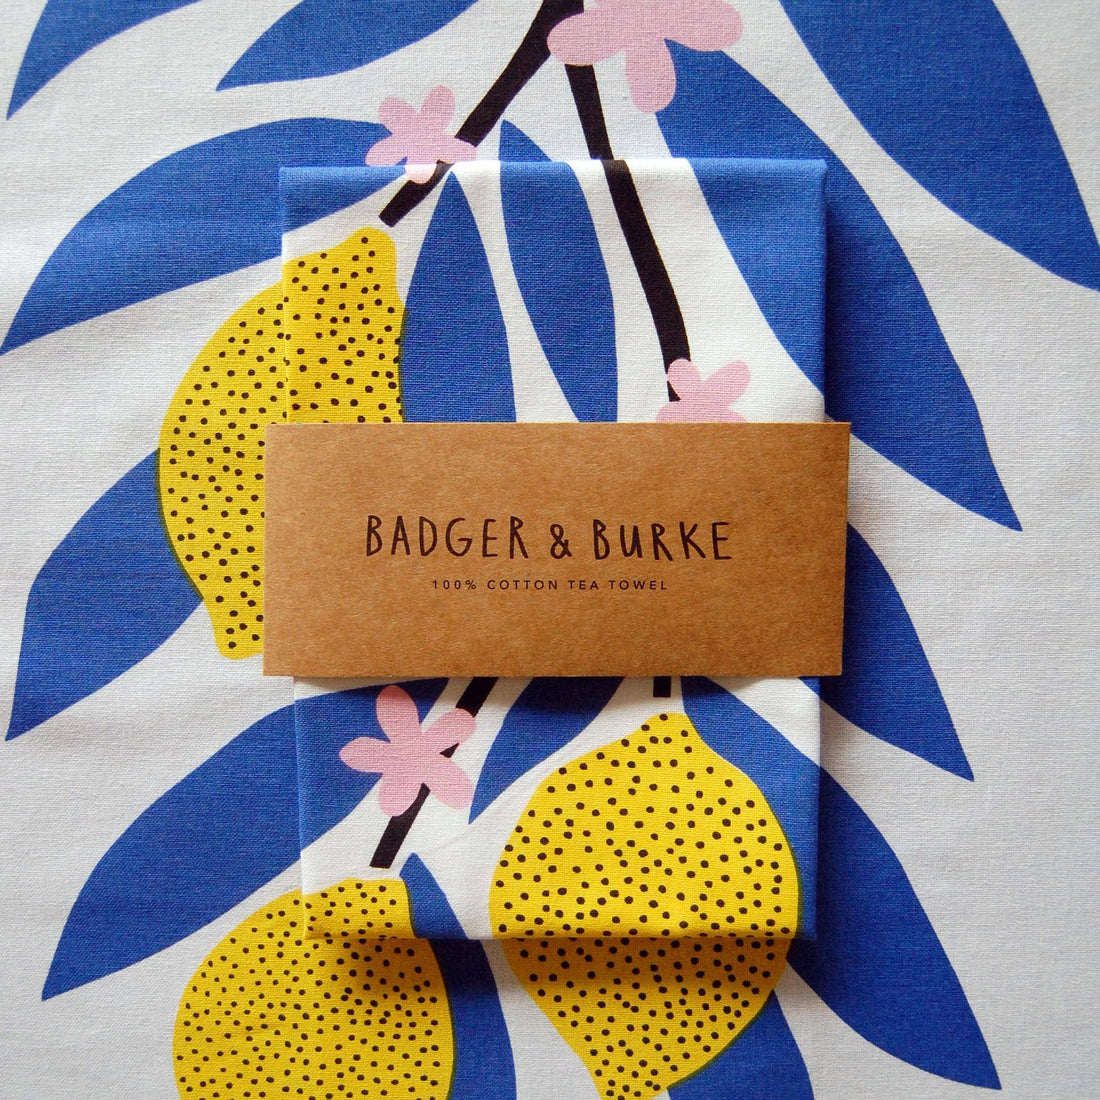 Maker Made: An Interview with Holton Brock from Badger + Burke